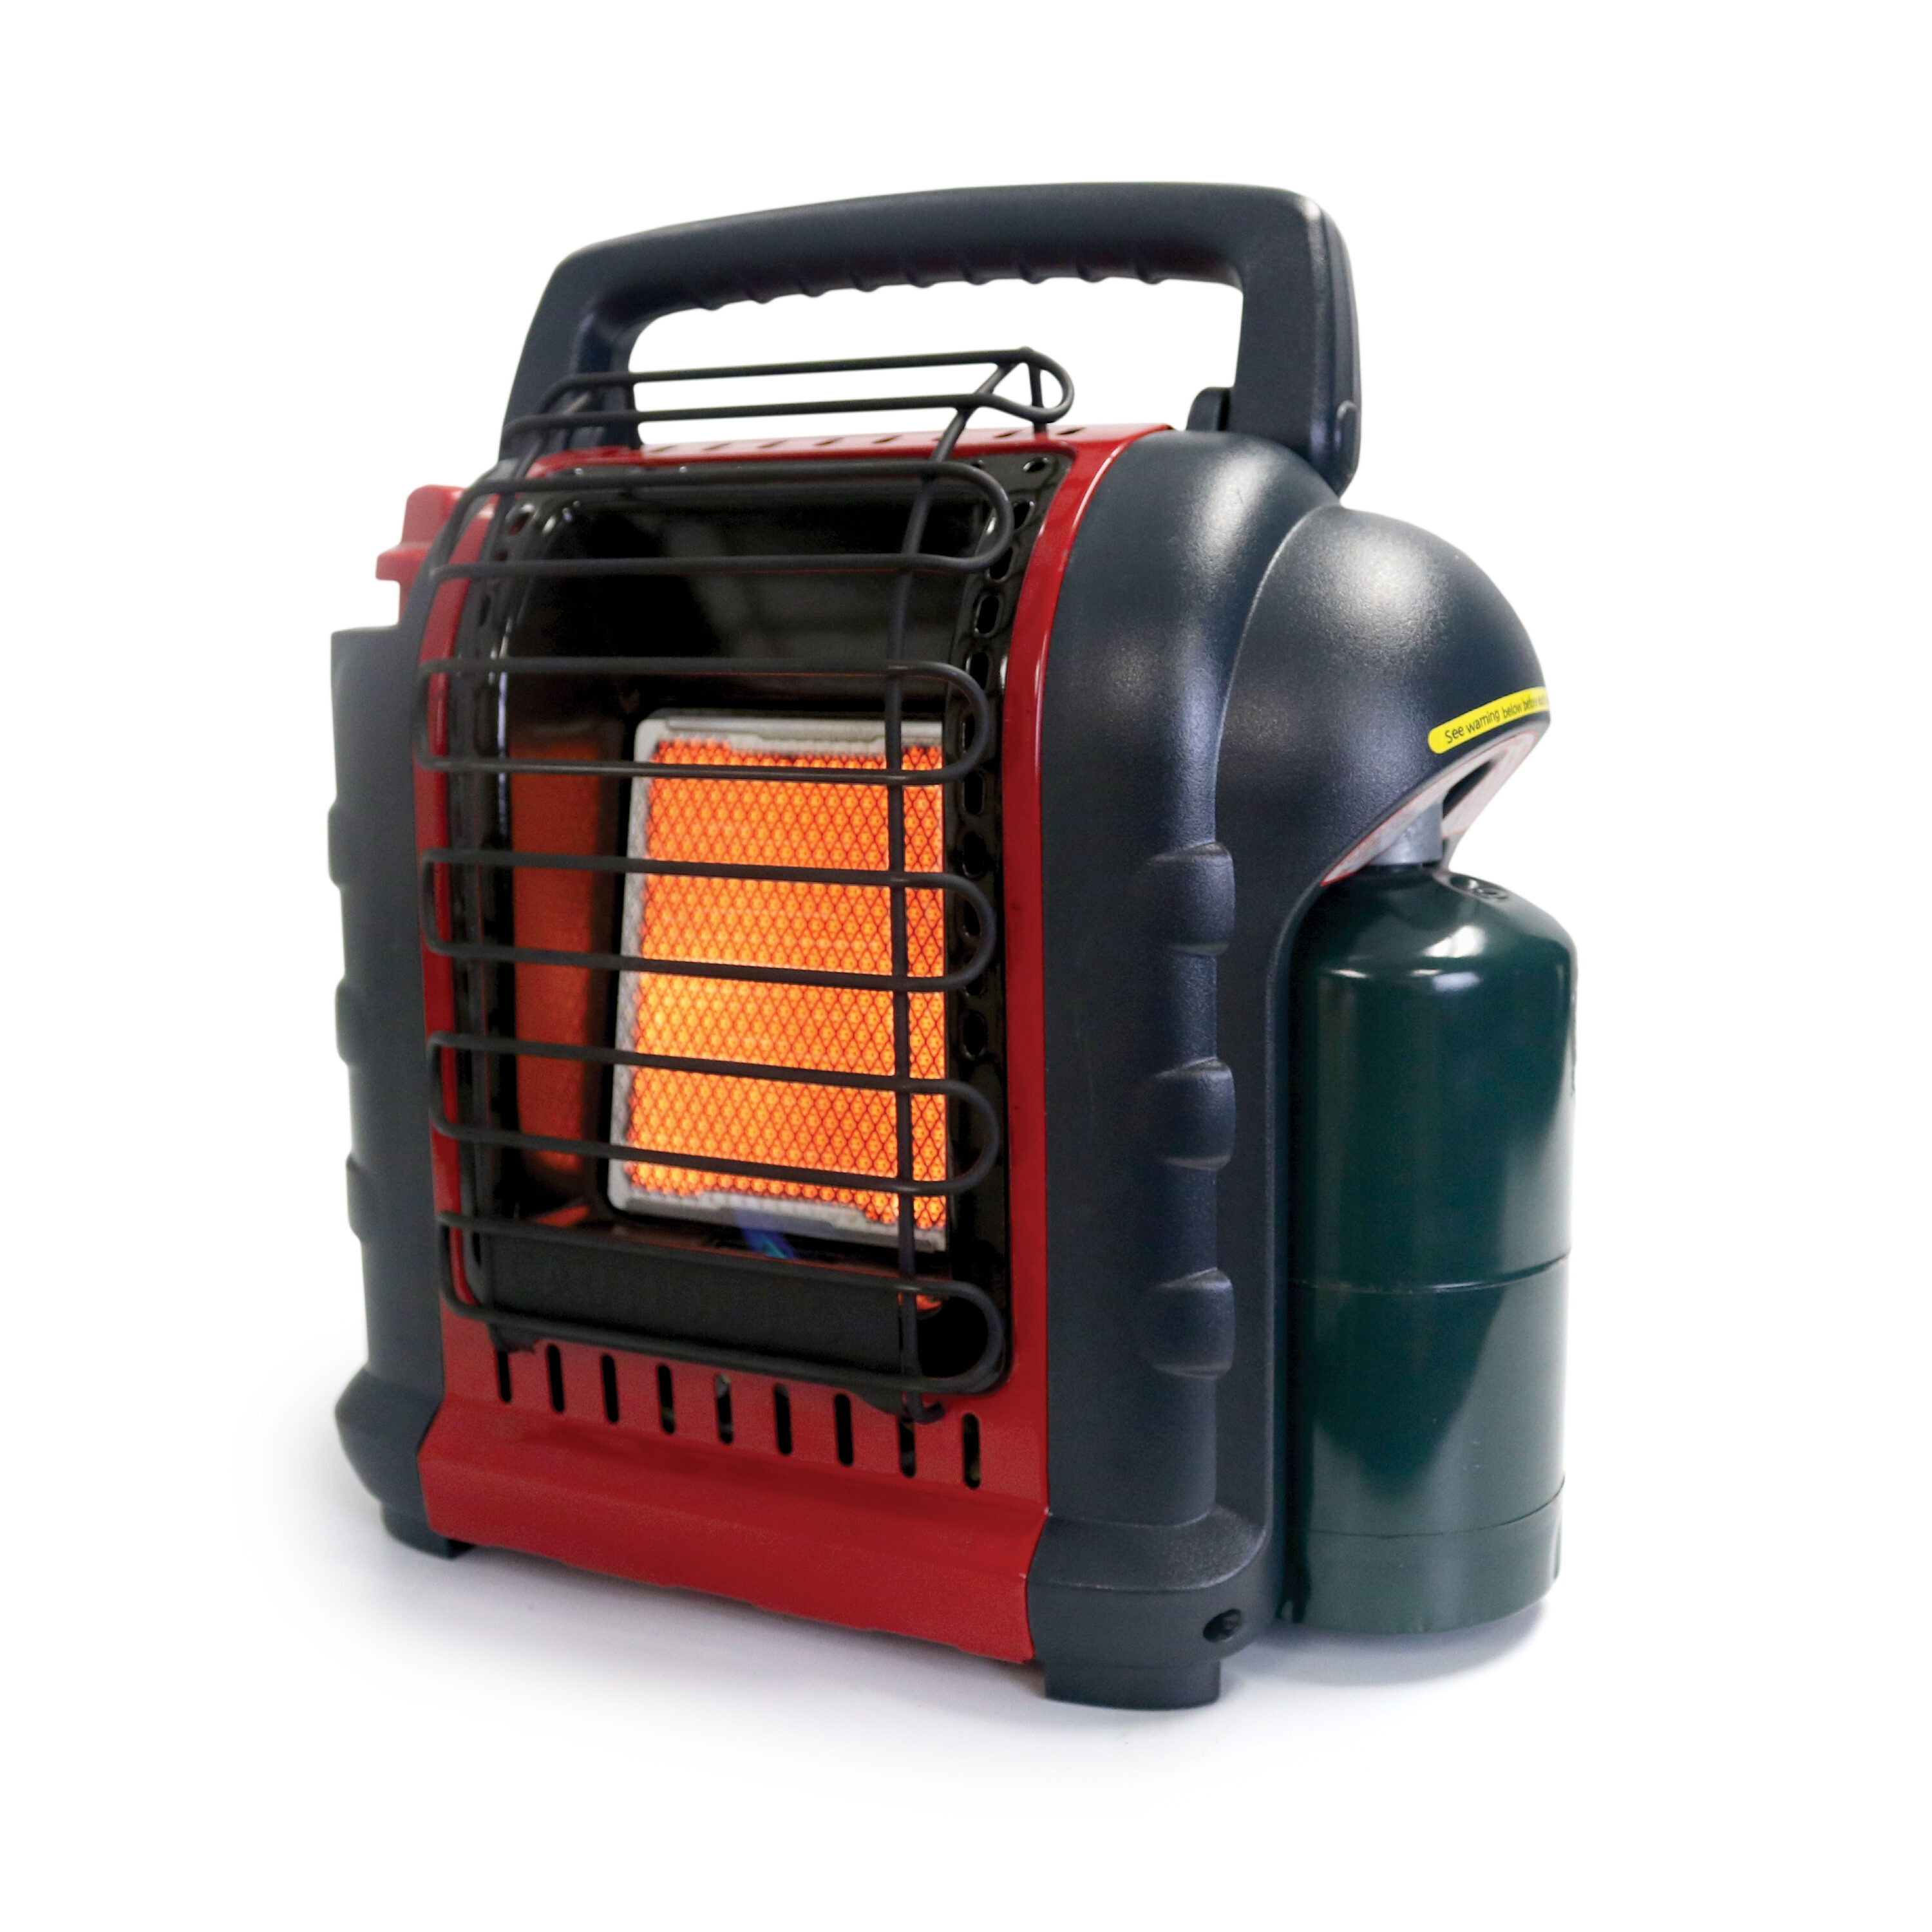 Portable Propane Heater Indoor Gas Stove Equipment Fit for Outdoor